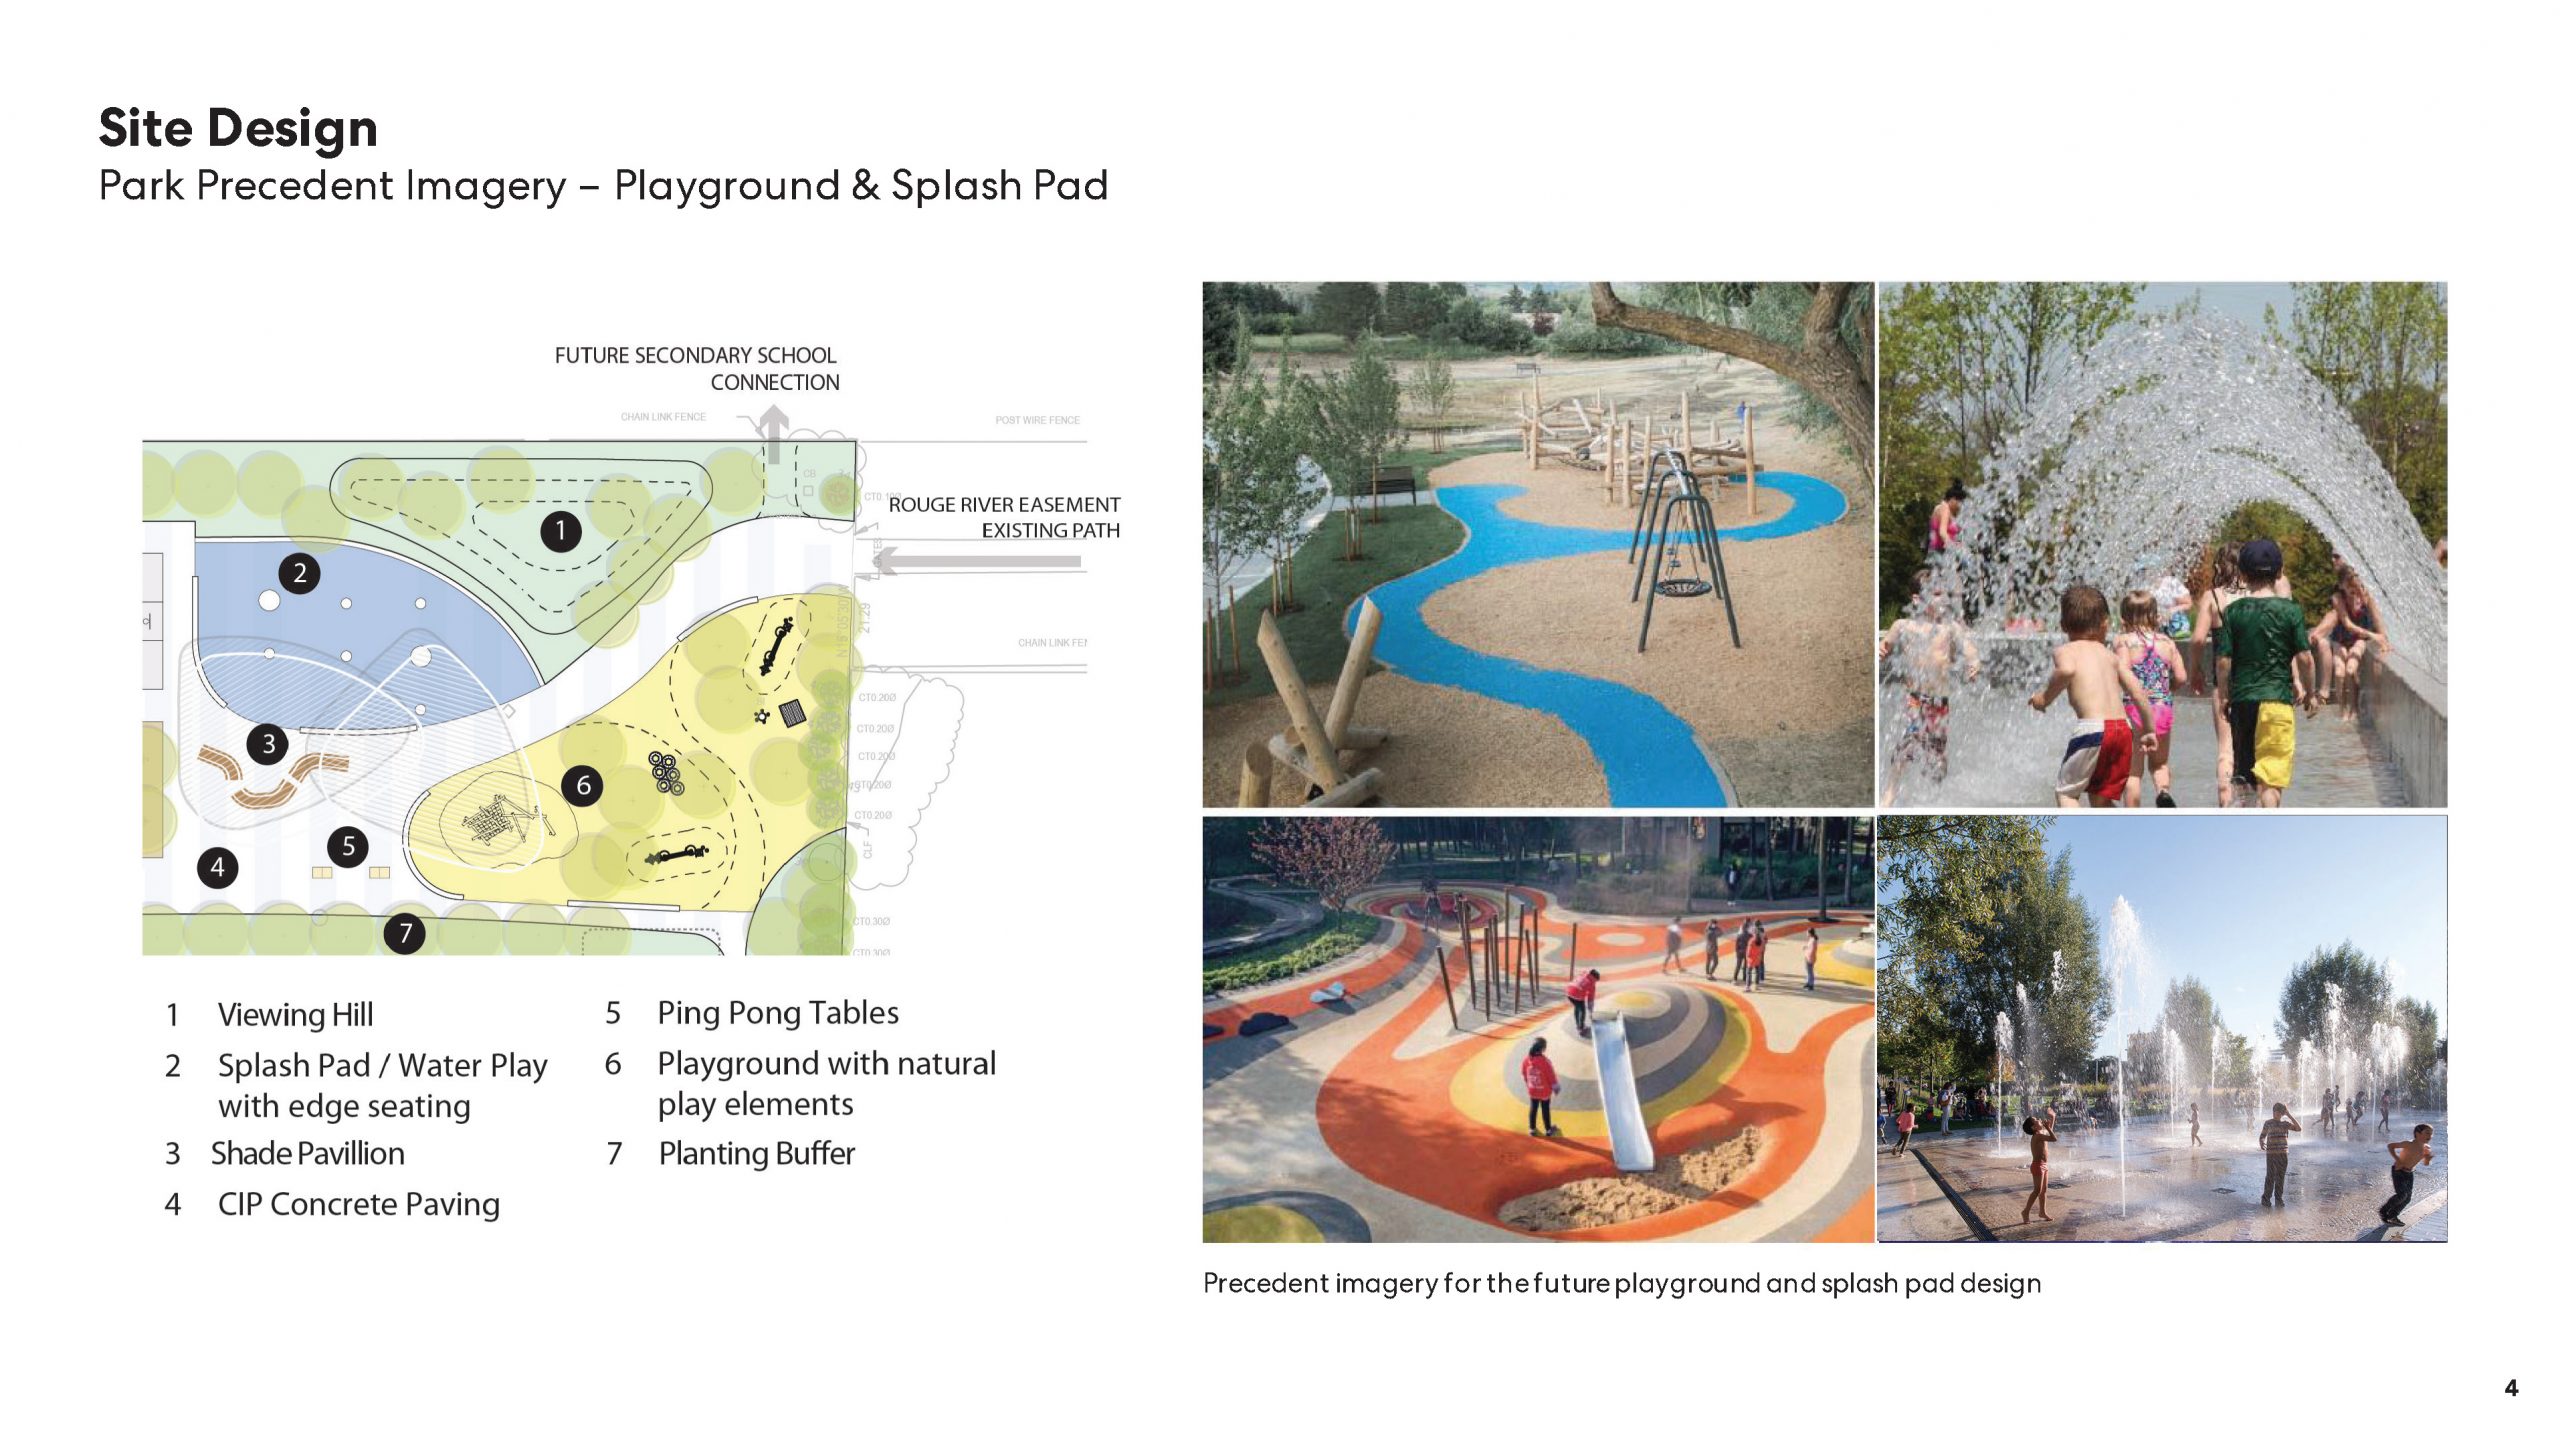 Precedent imagery for the future playground and splash pad design